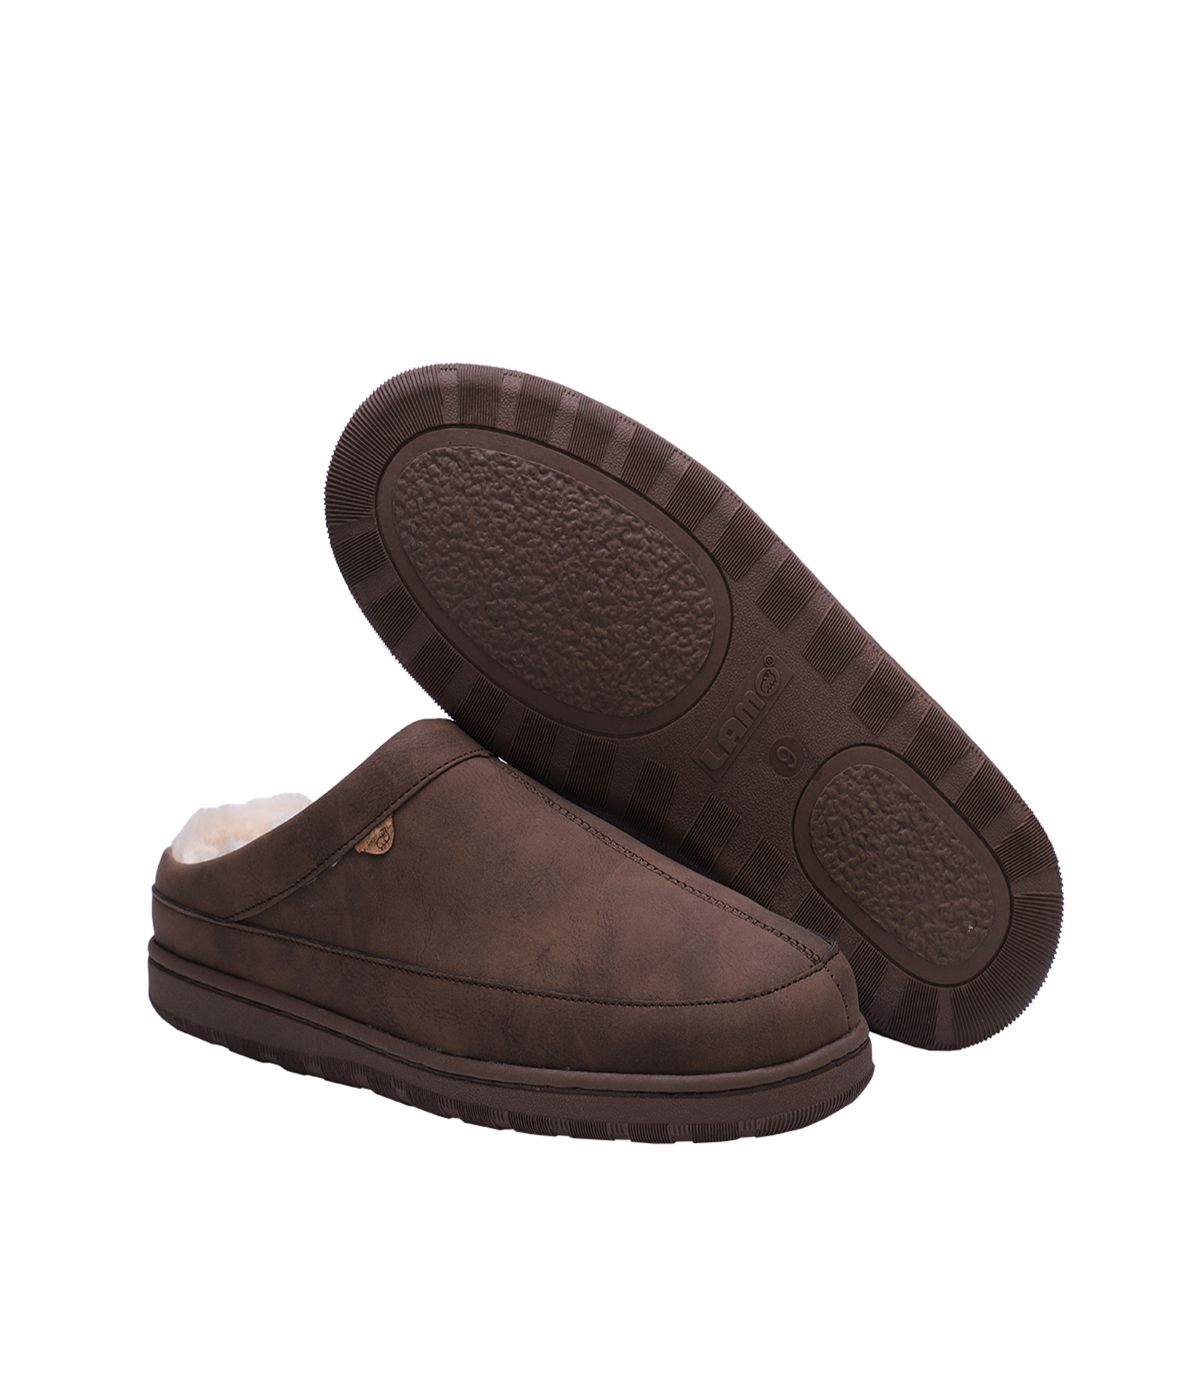 Men's clog slipper with fur lining Brown